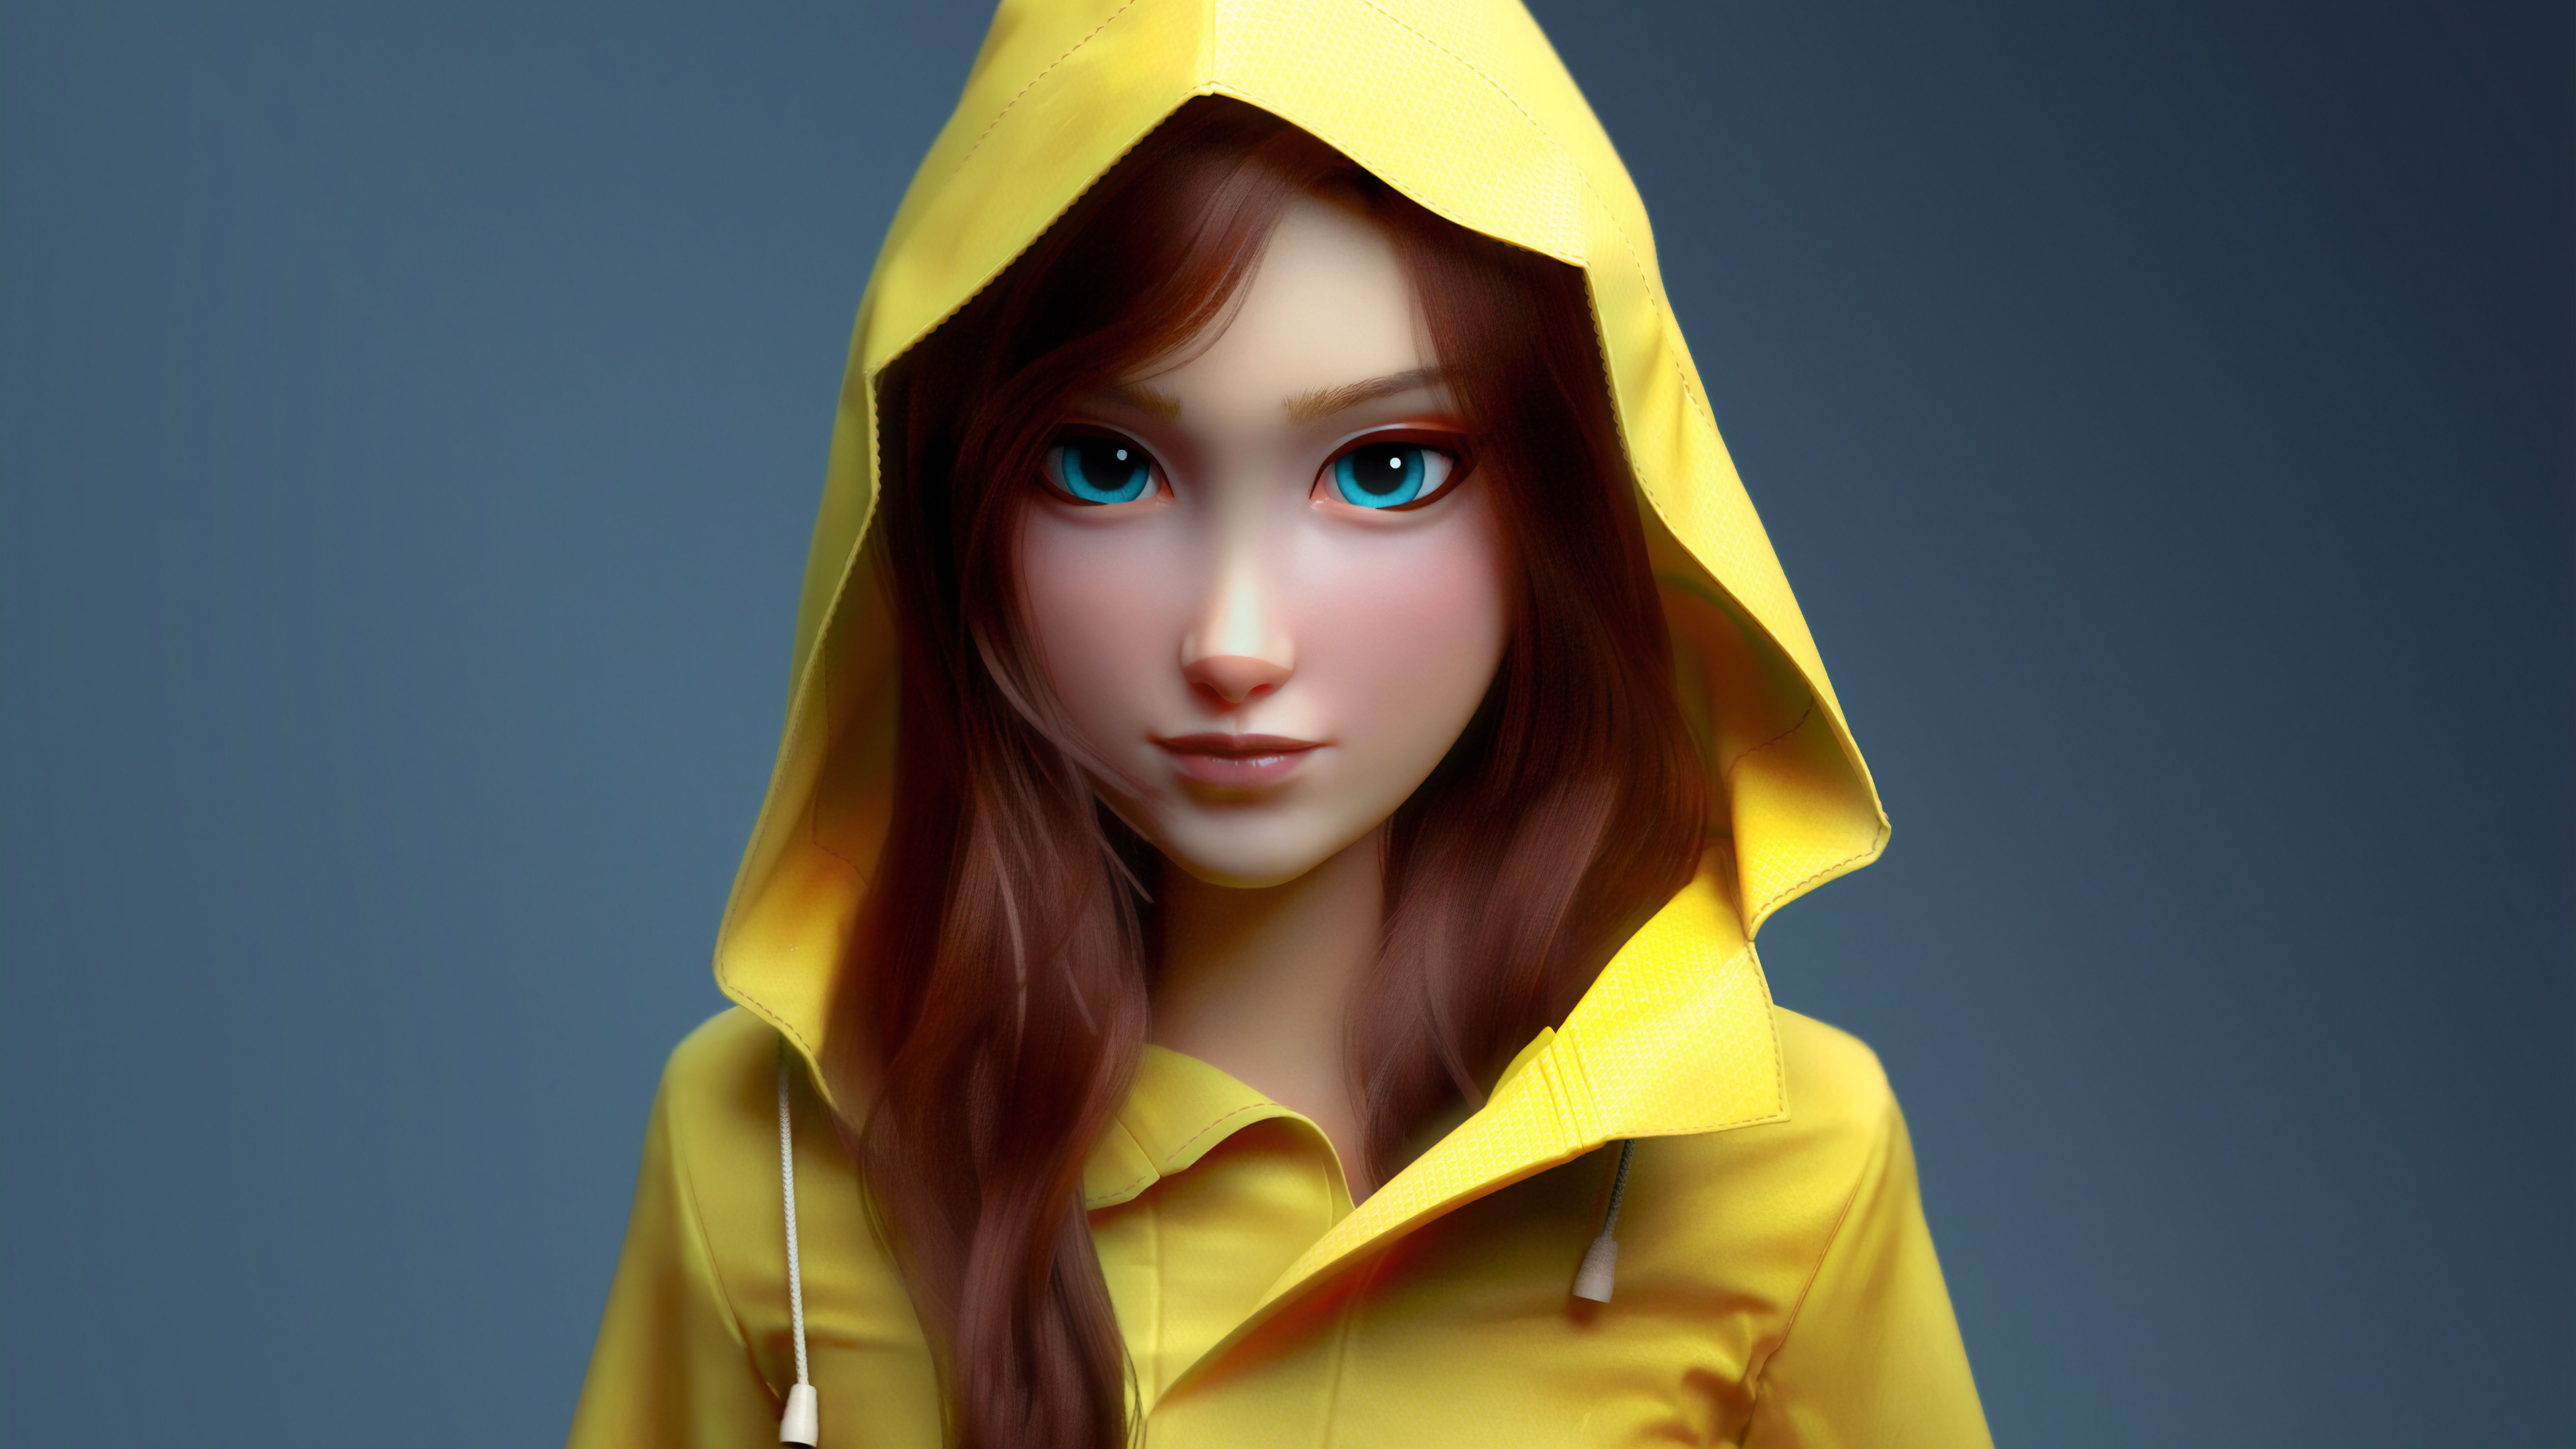 3D Cgi Girl Art 8k HD 4k Wallpaper, Image, Background, Photo and Picture